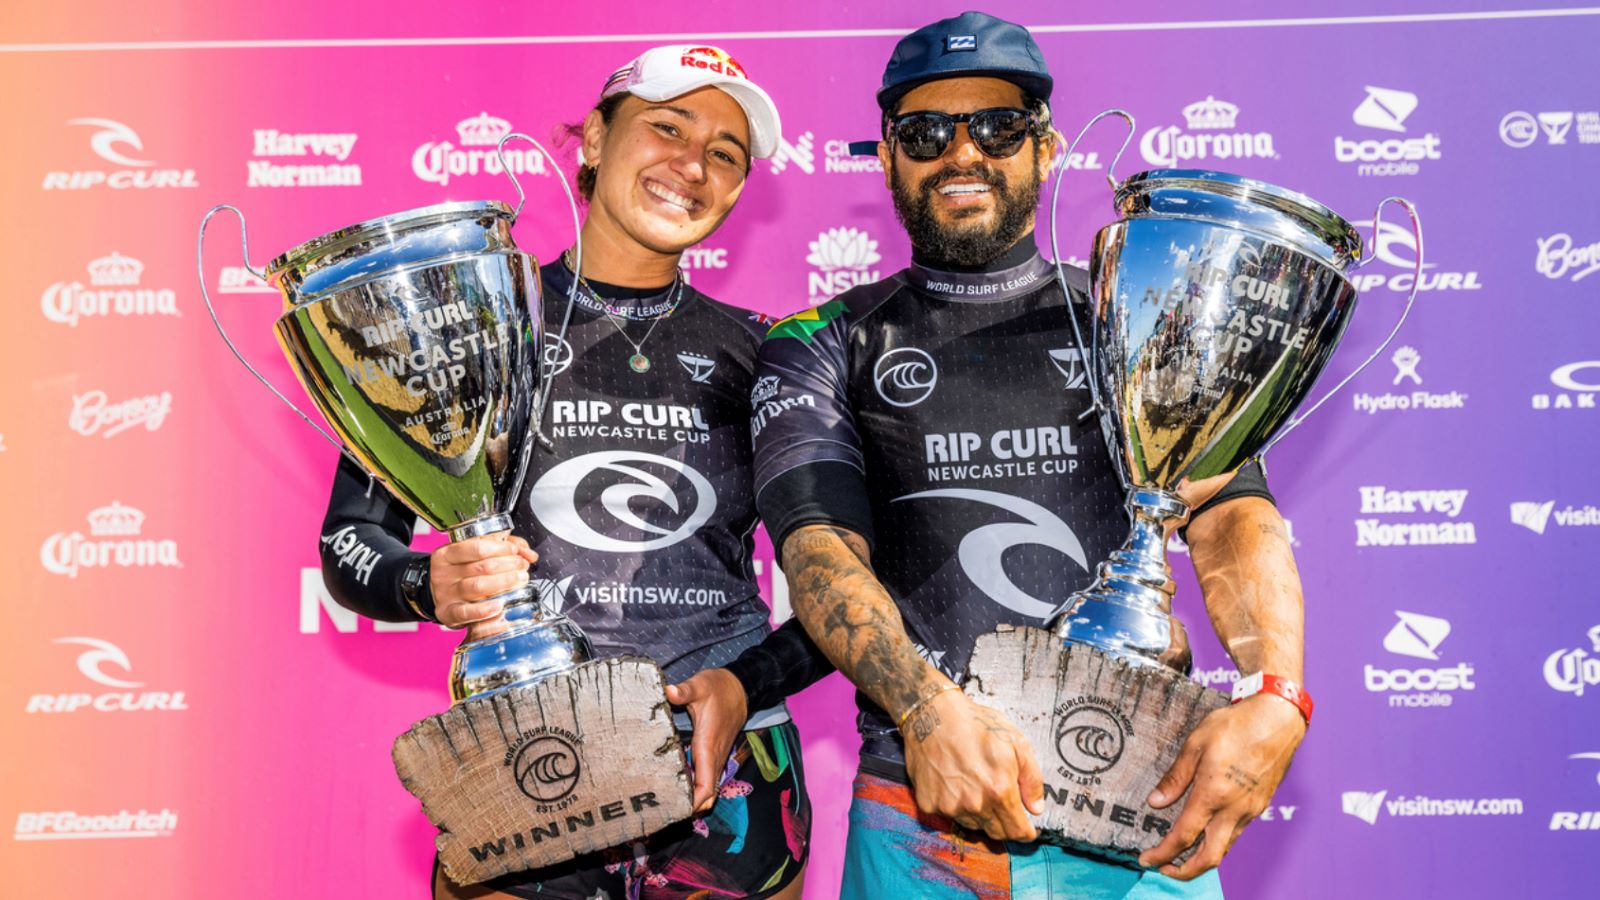 Reigning World Champions Carissa Moore (HAW) and Italo Ferreira (BRA), winners of the Rip Curl Newcastle Cup pres. by Corona. Credit @WSL_Dunbar 